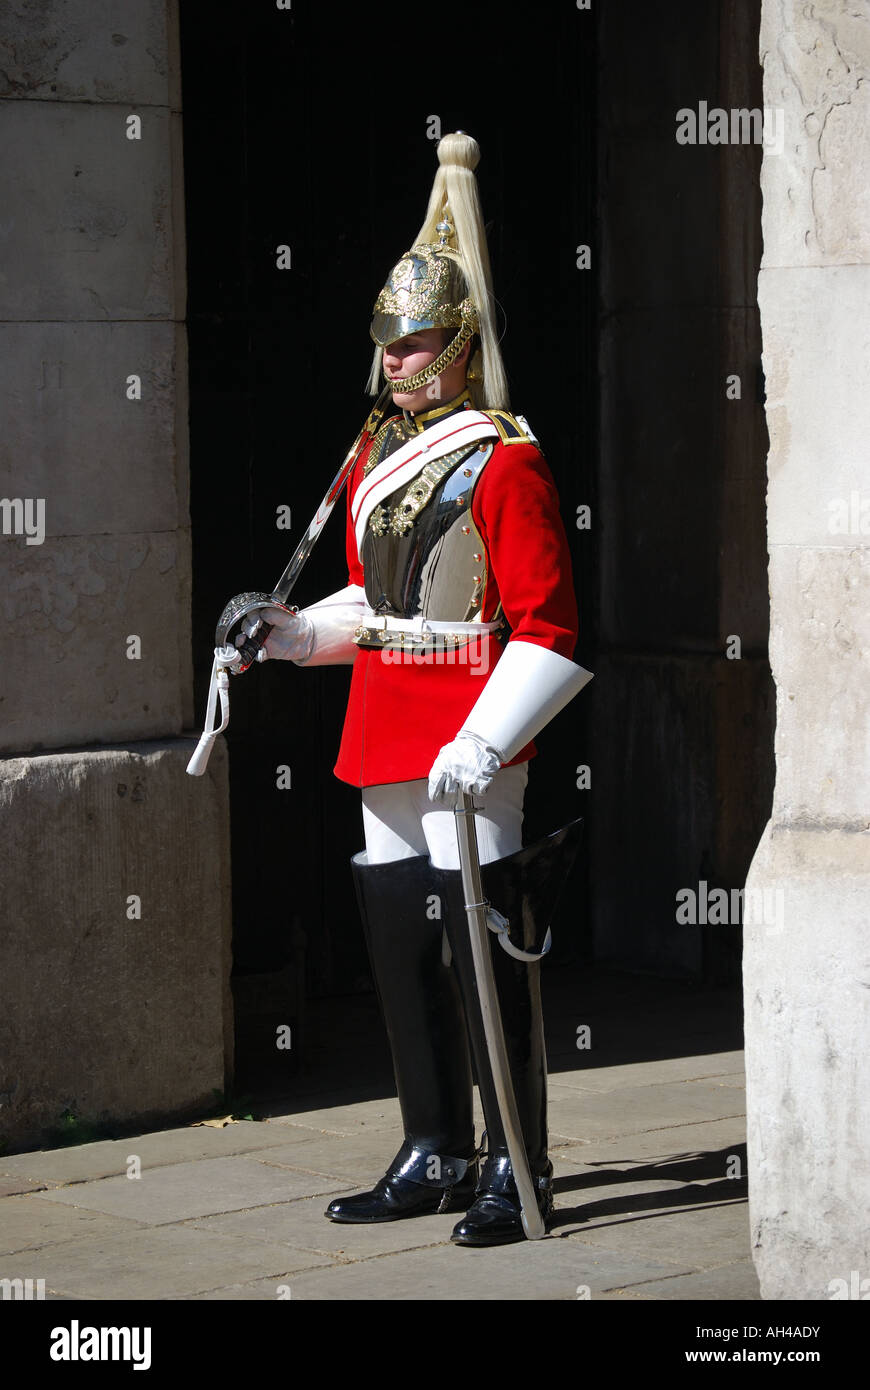 Royal Horse Guard, Horse Guard's Parade, Whitehall, City of Westminster, Greater London, England, United Kingdom Stock Photo